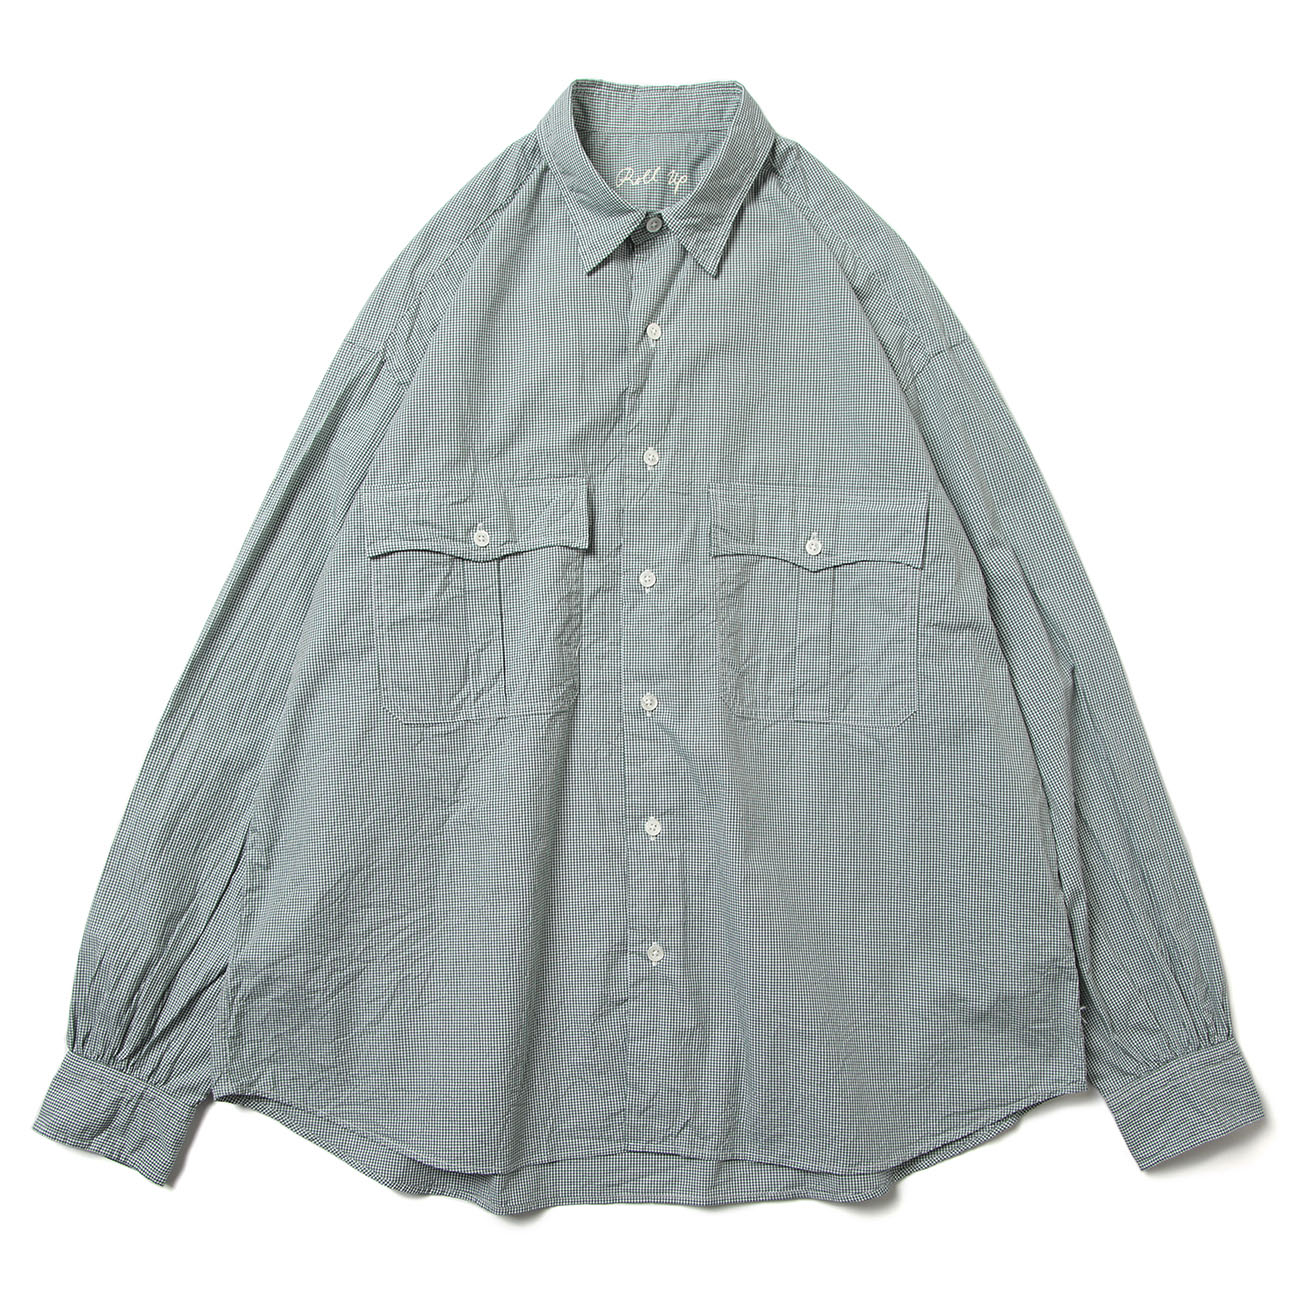 ROLL UP NEW GINGHAM CHECK SHIRT - Olive